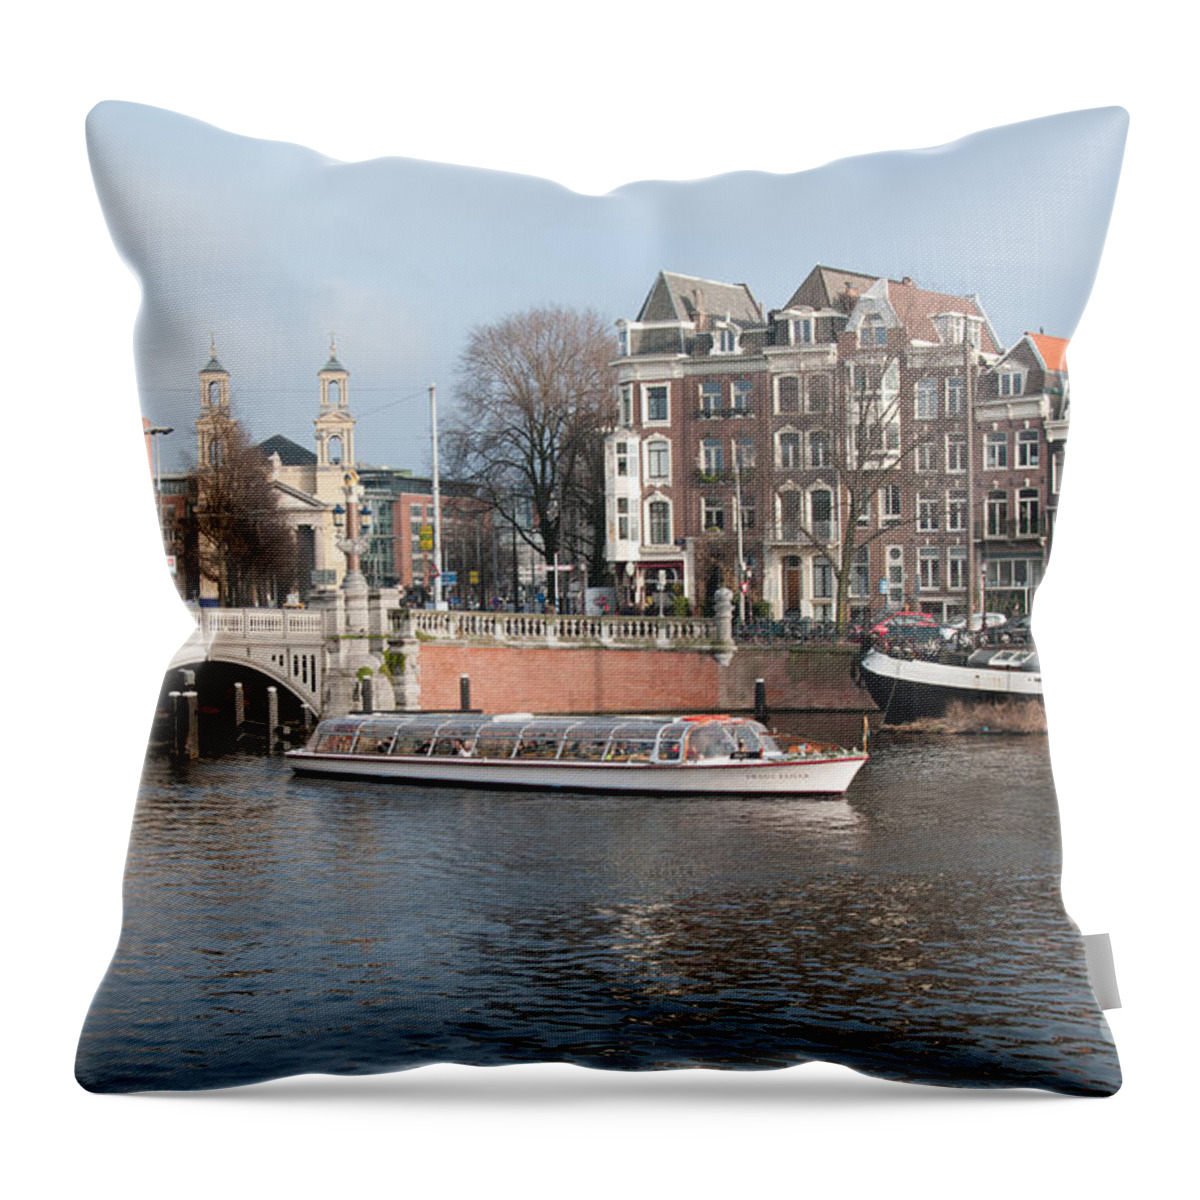 Along The River Throw Pillow featuring the digital art City Scenes from Amsterdam #2 by Carol Ailles